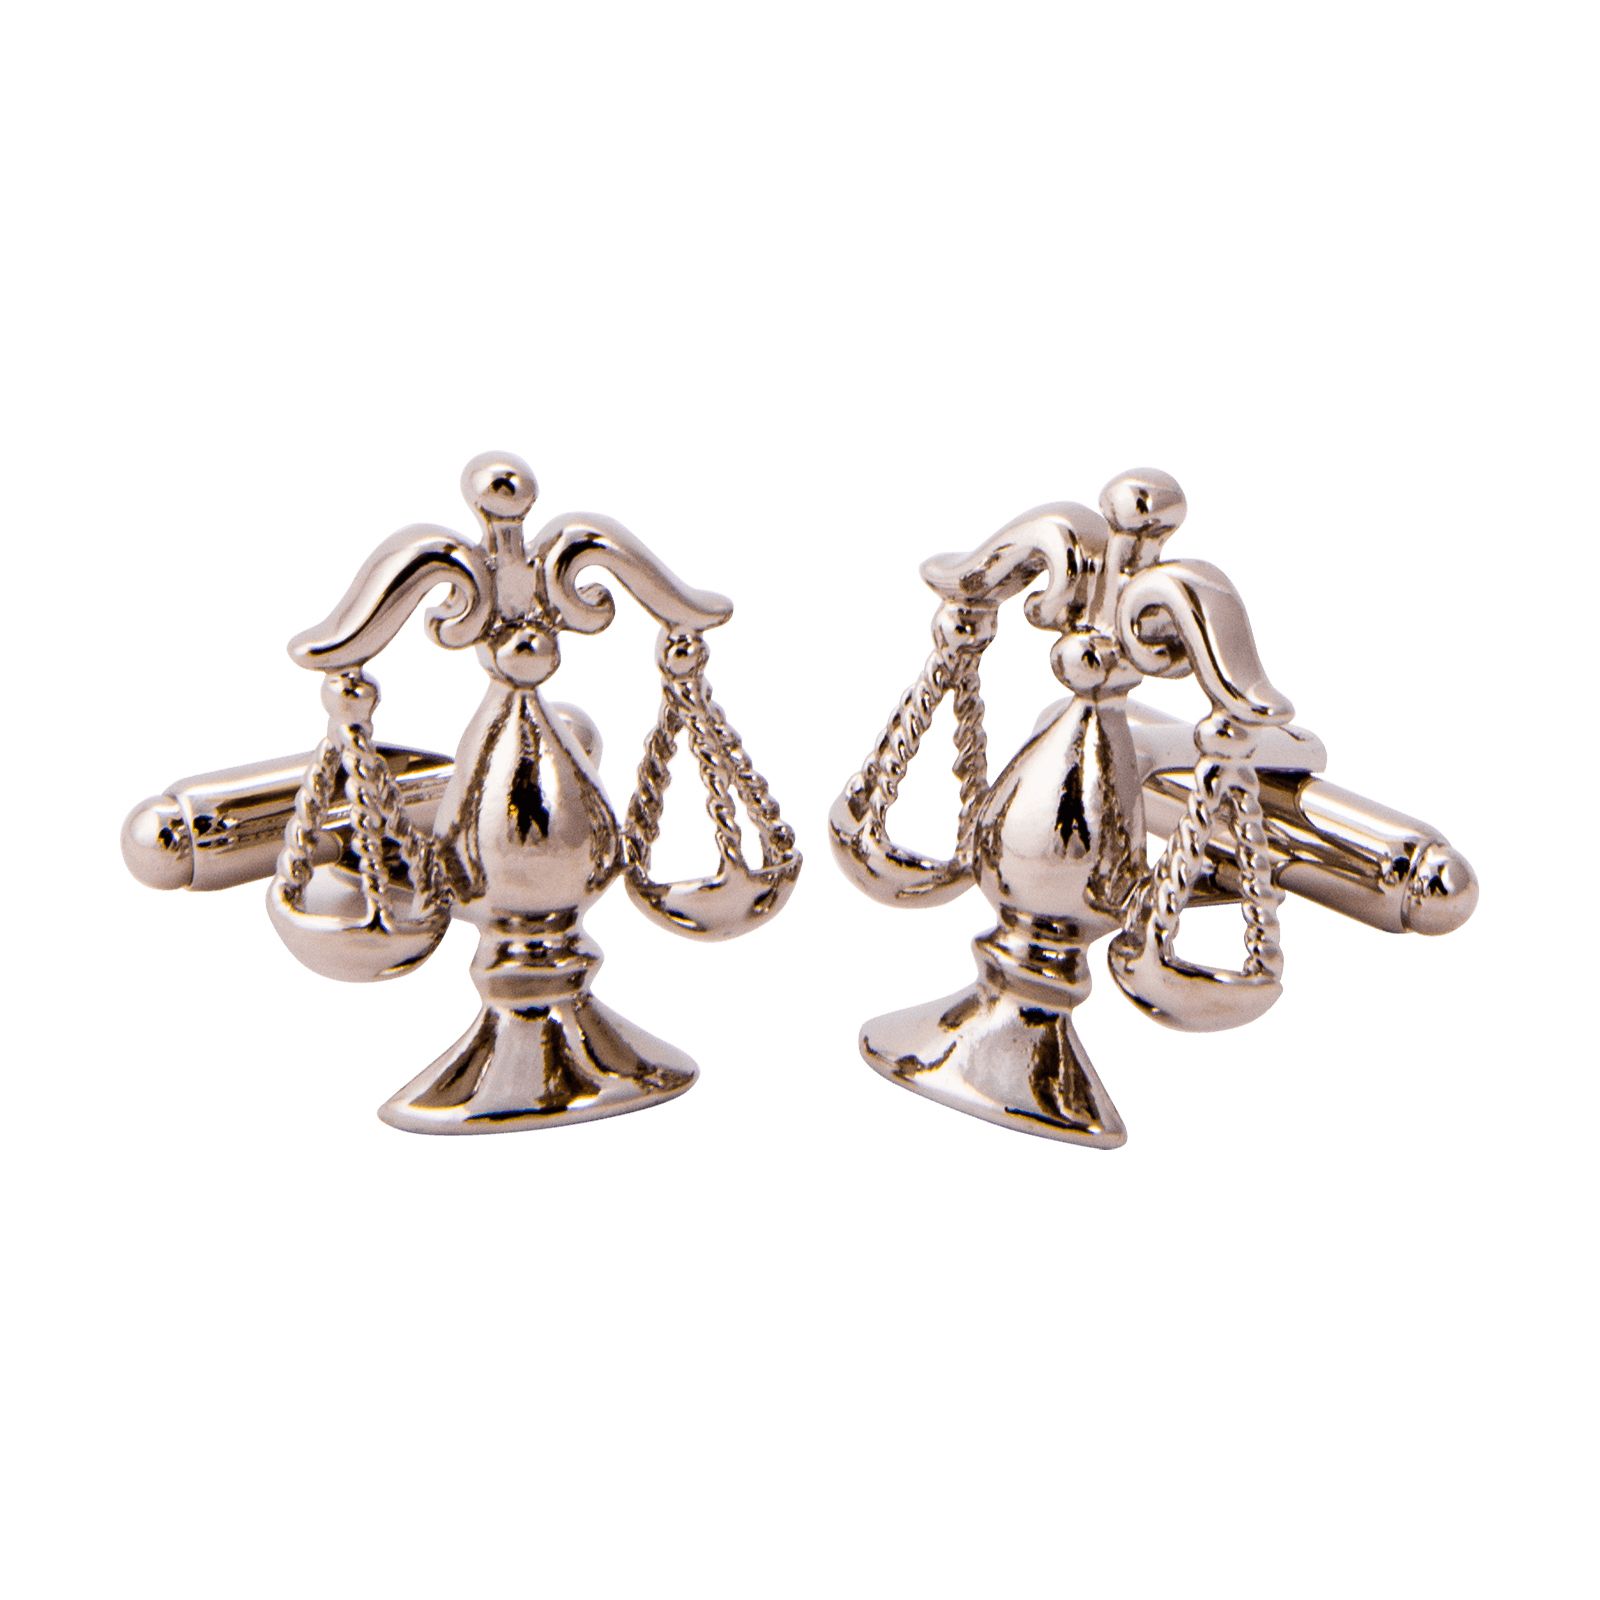 Scales of Justice Sterling Silver Cuff Links